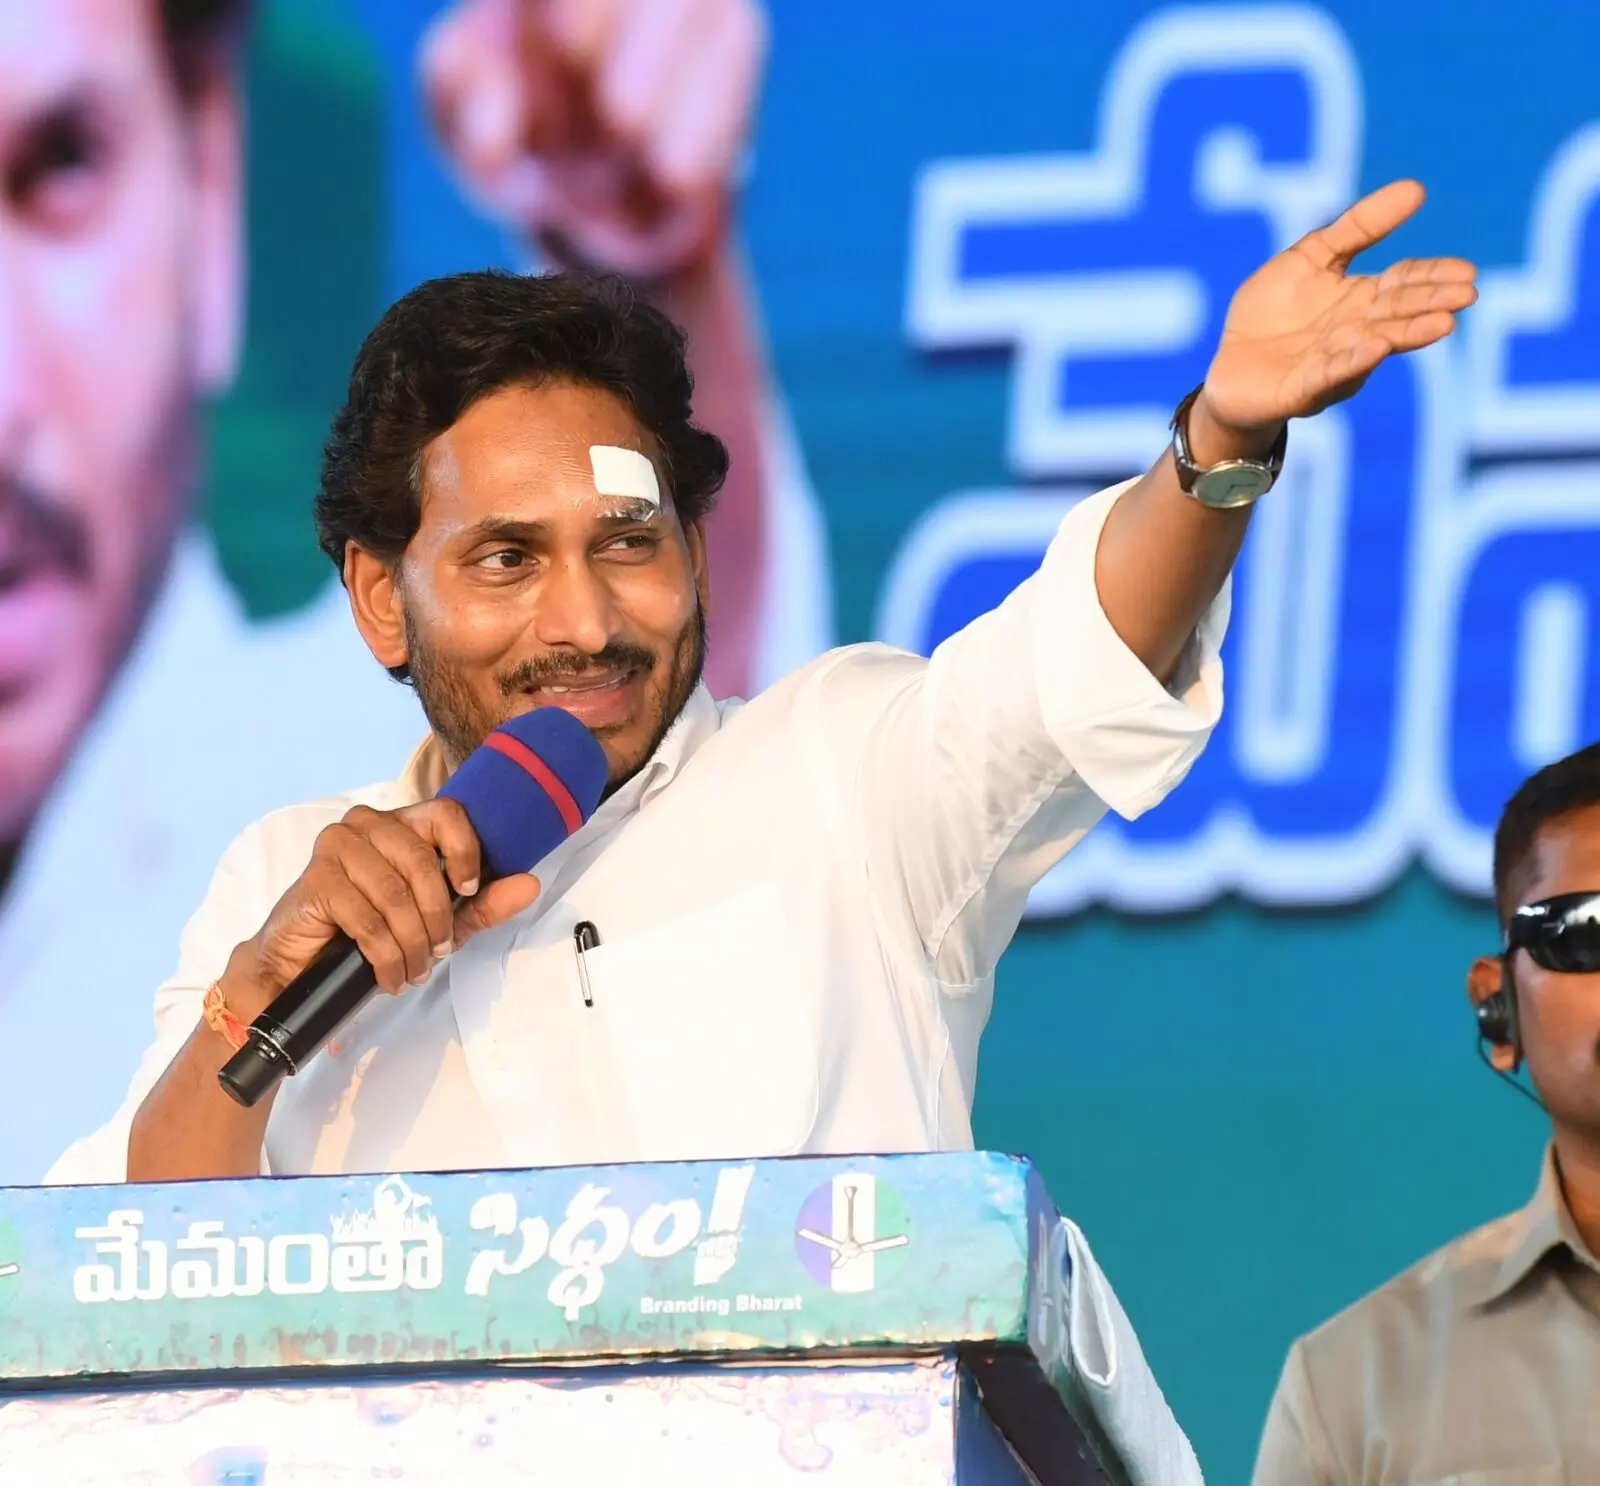 YS Jagan says he will not be intimidated by attacks, criticizes Chandrababu for mistreatment of the poor